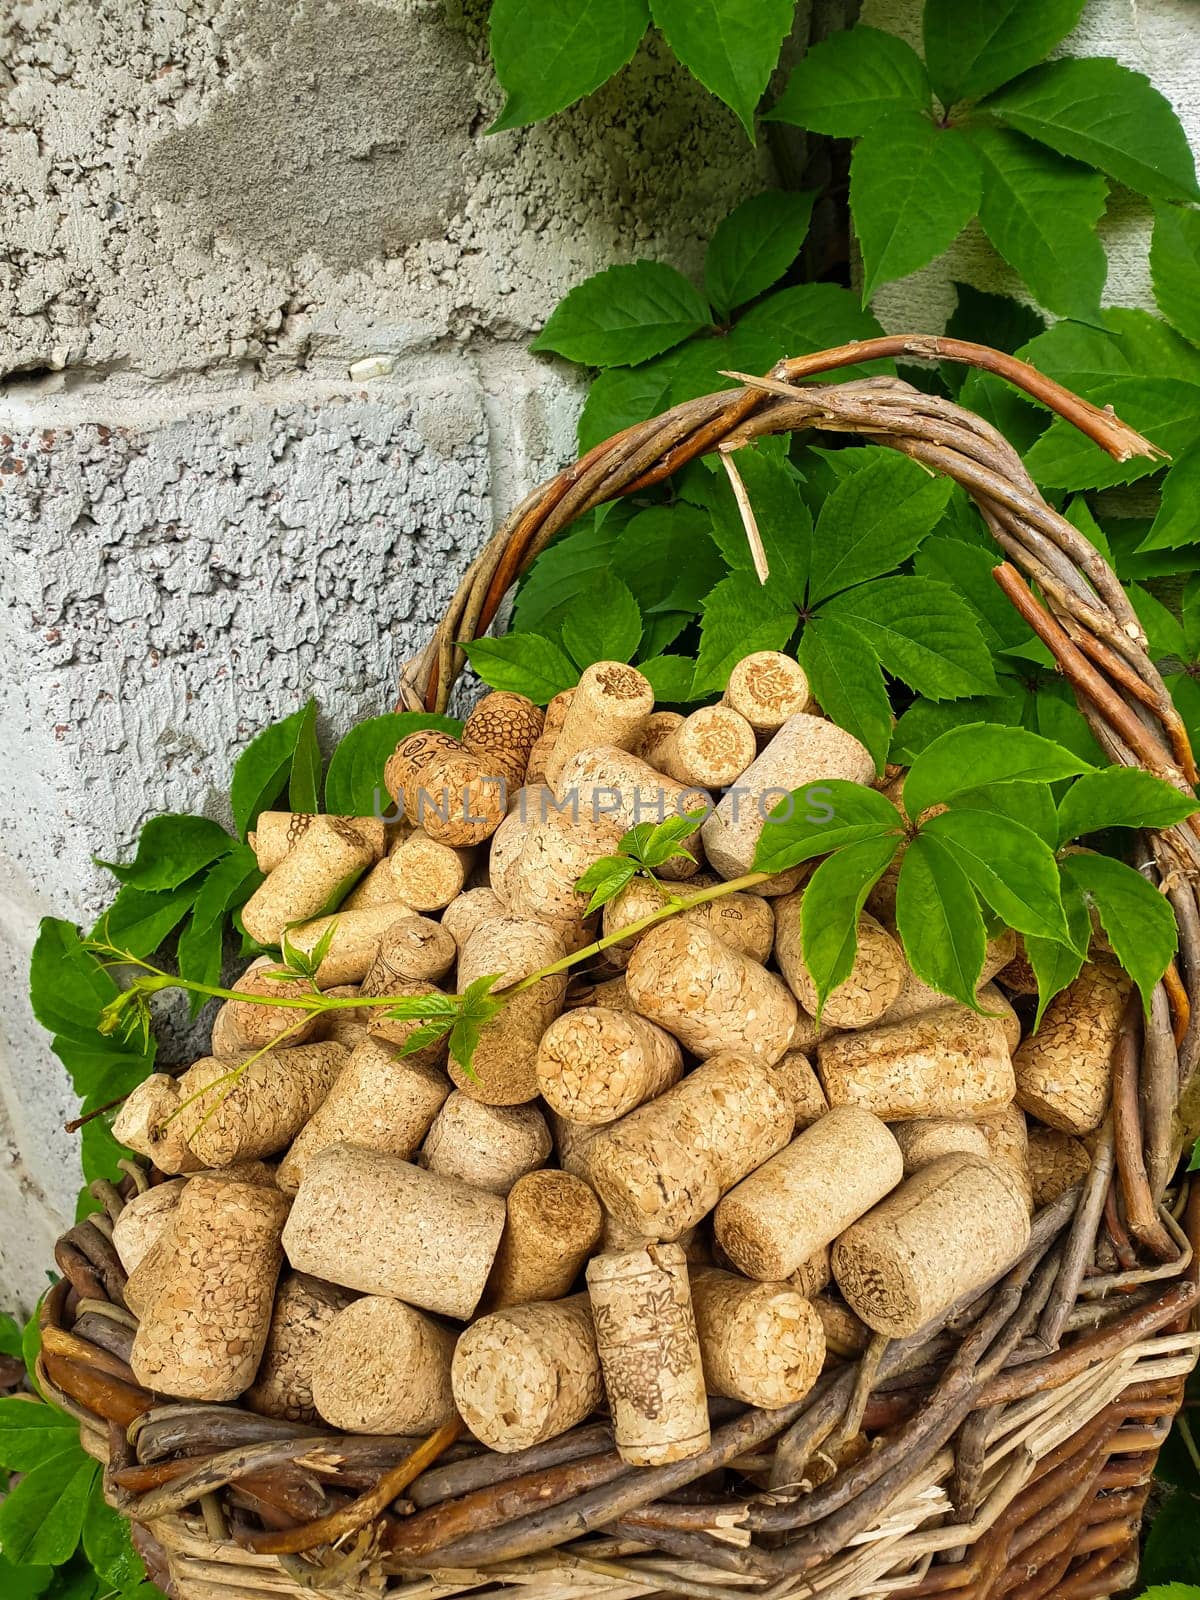 There are wine corks in an old wicker basket. Grapes entwine a basket with wine corks. High quality photo